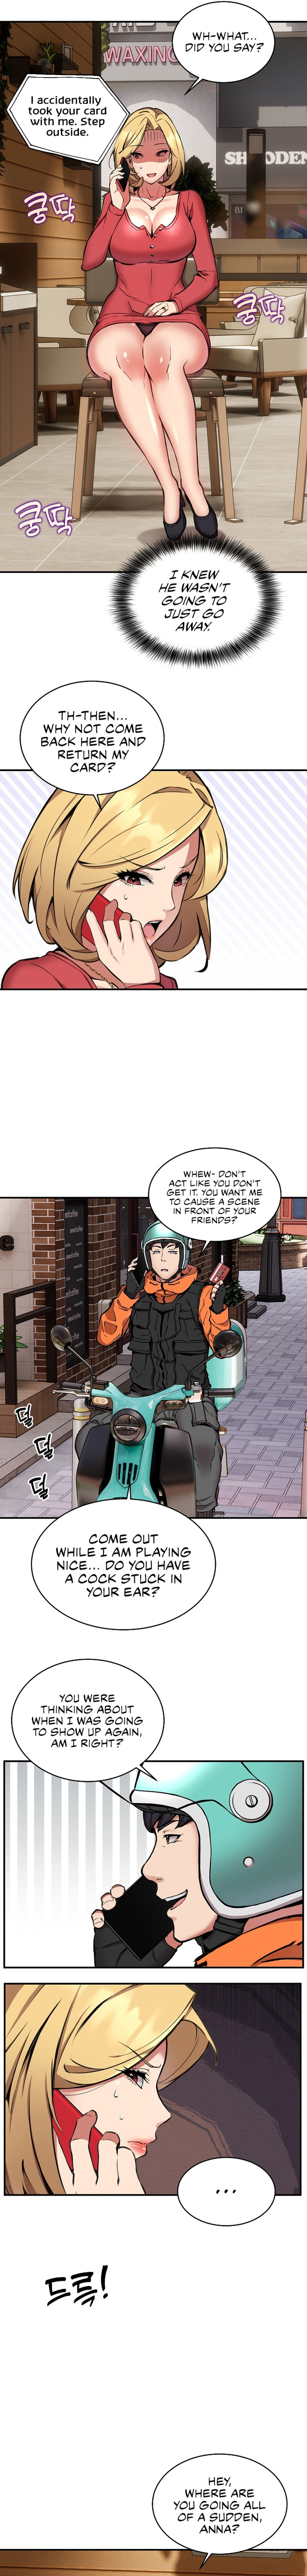 Driver in the New City - Chapter 8 Page 2